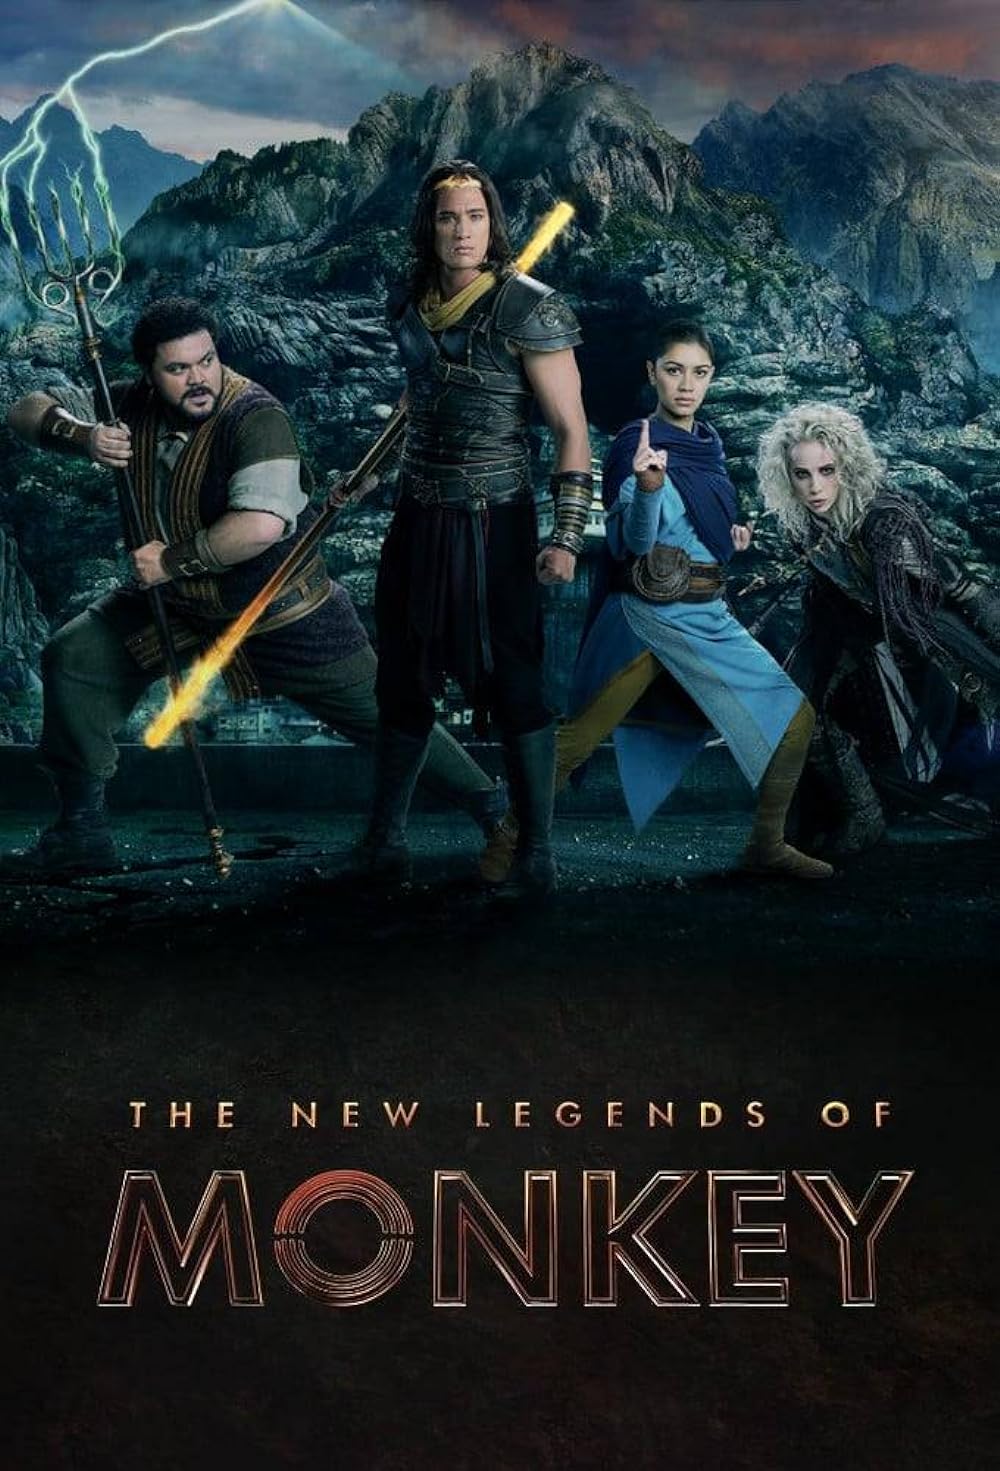 The New Legends of Monkey, PopViewers